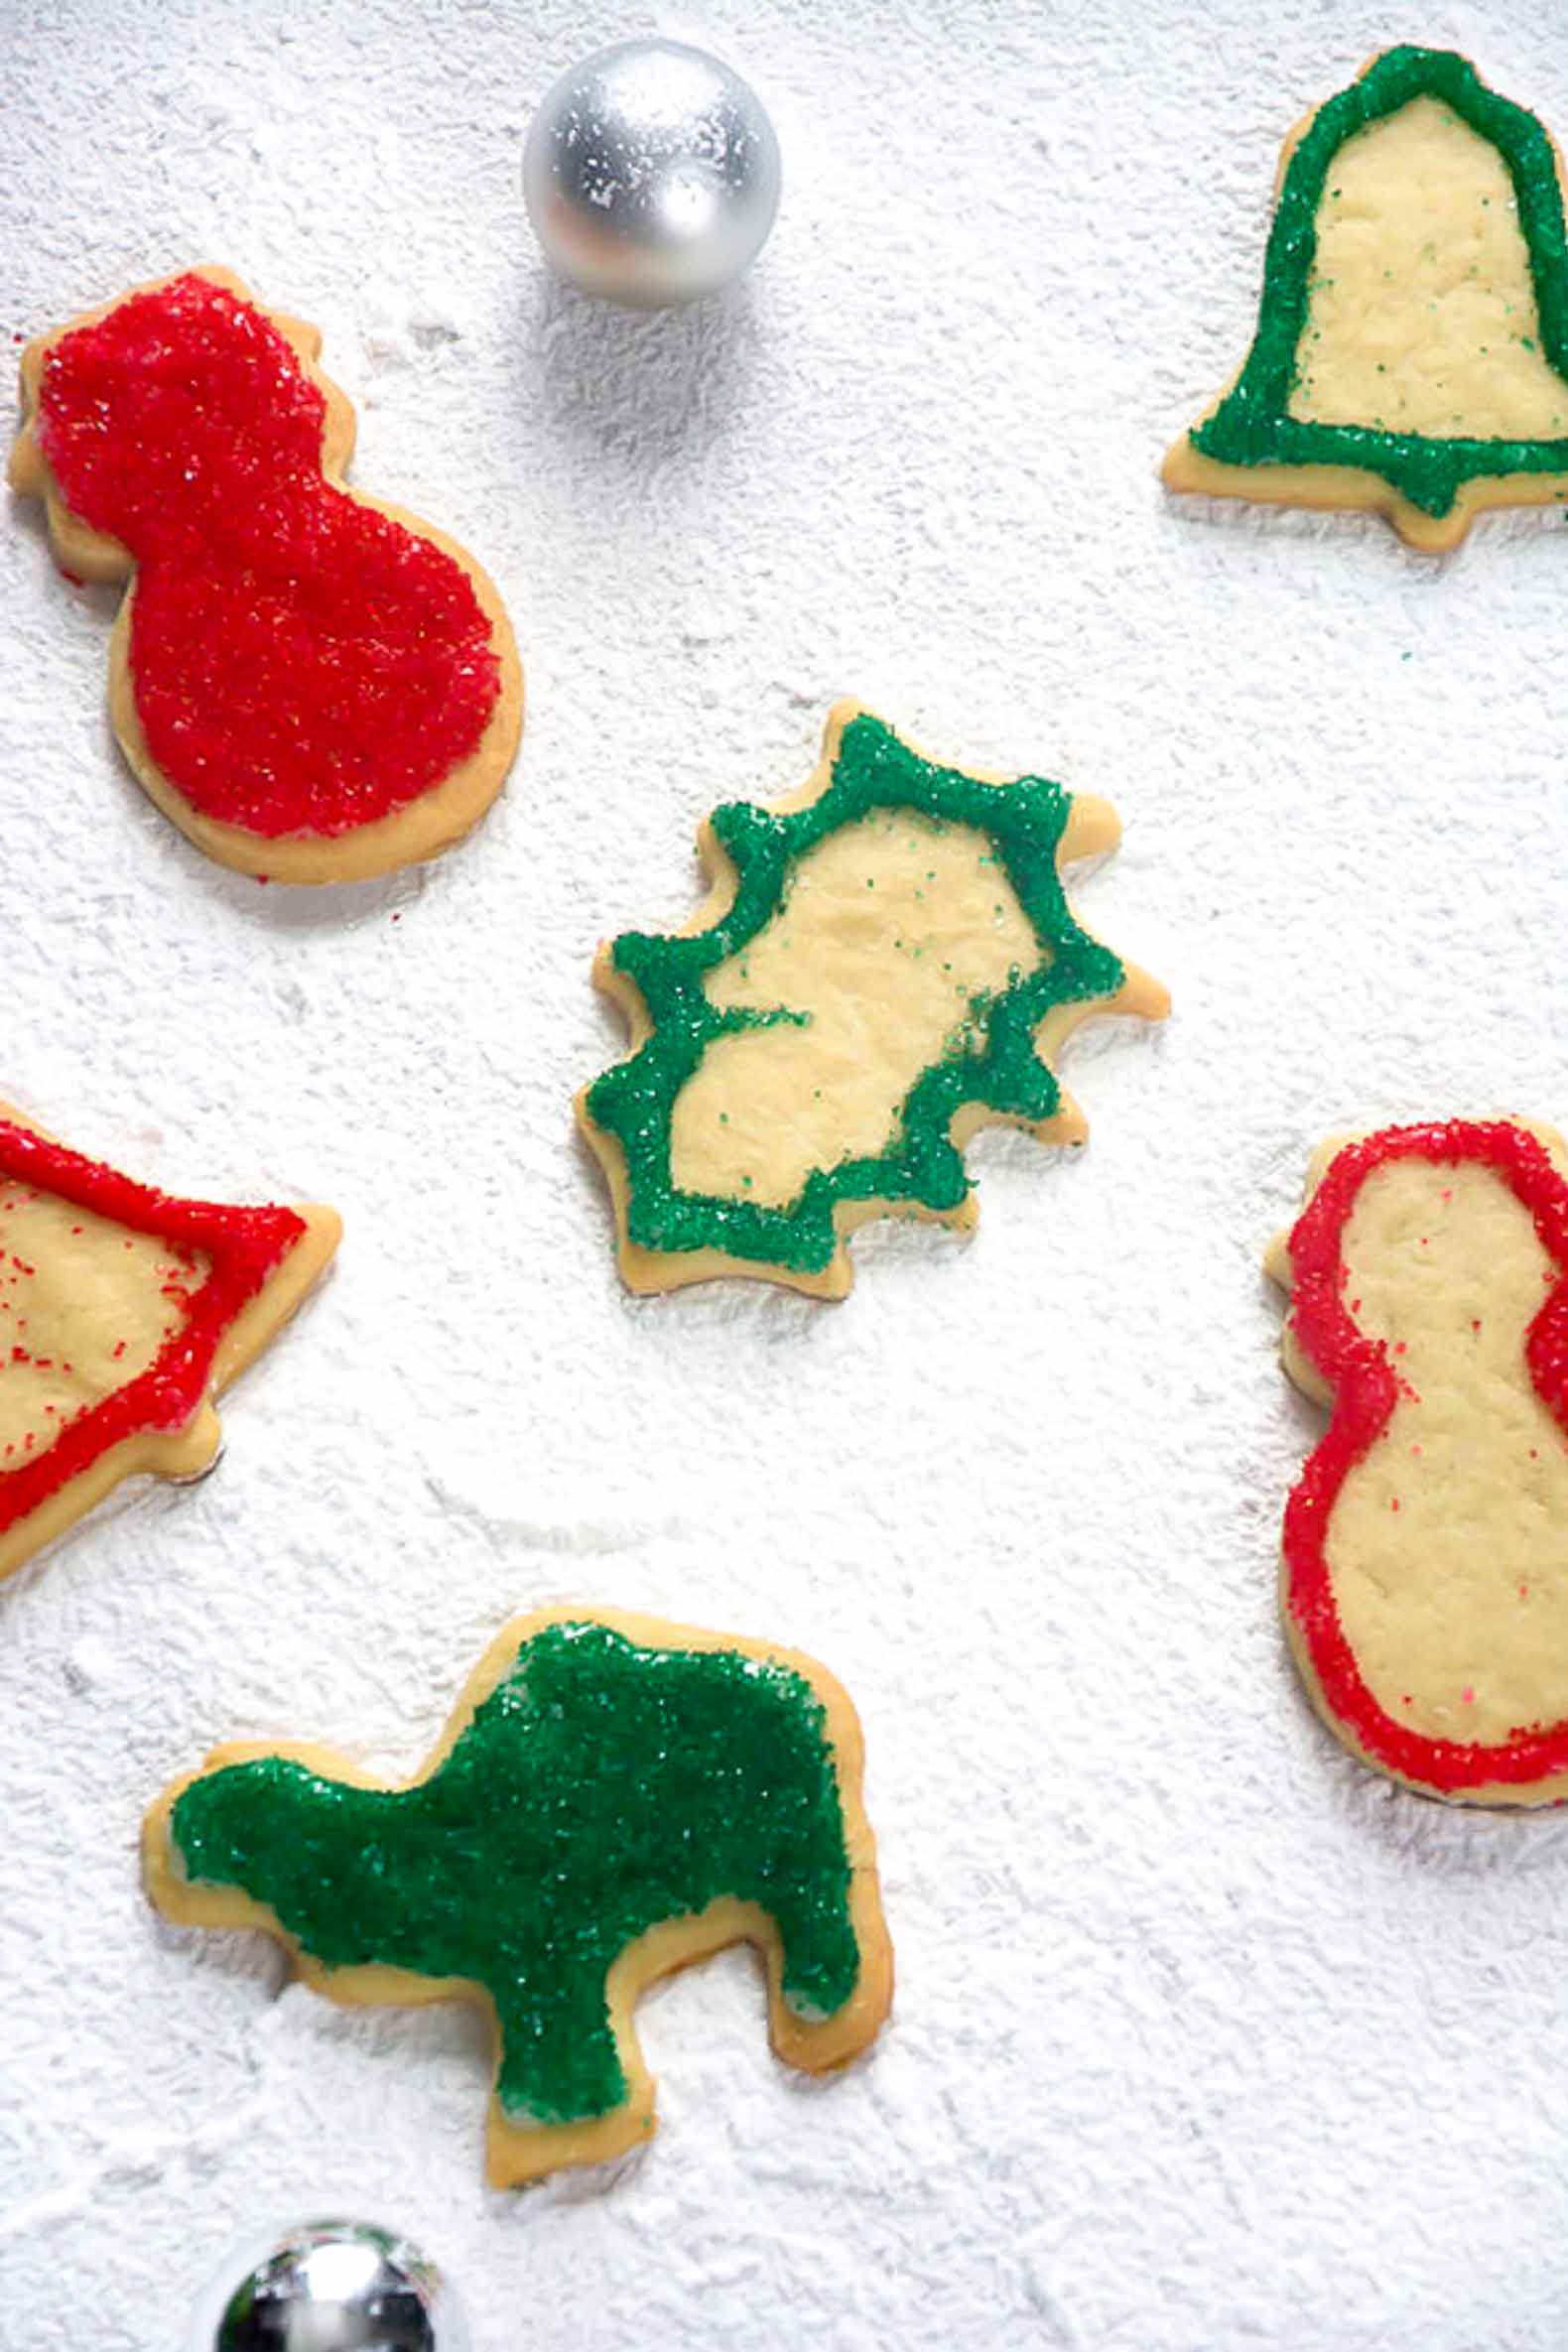 easy cut out sugar cookies recipe, holiday, Christmas, No Chill, Best, Icing, Frosting, decorating, perfect, shape, butter, birthday, how to make, mom, 